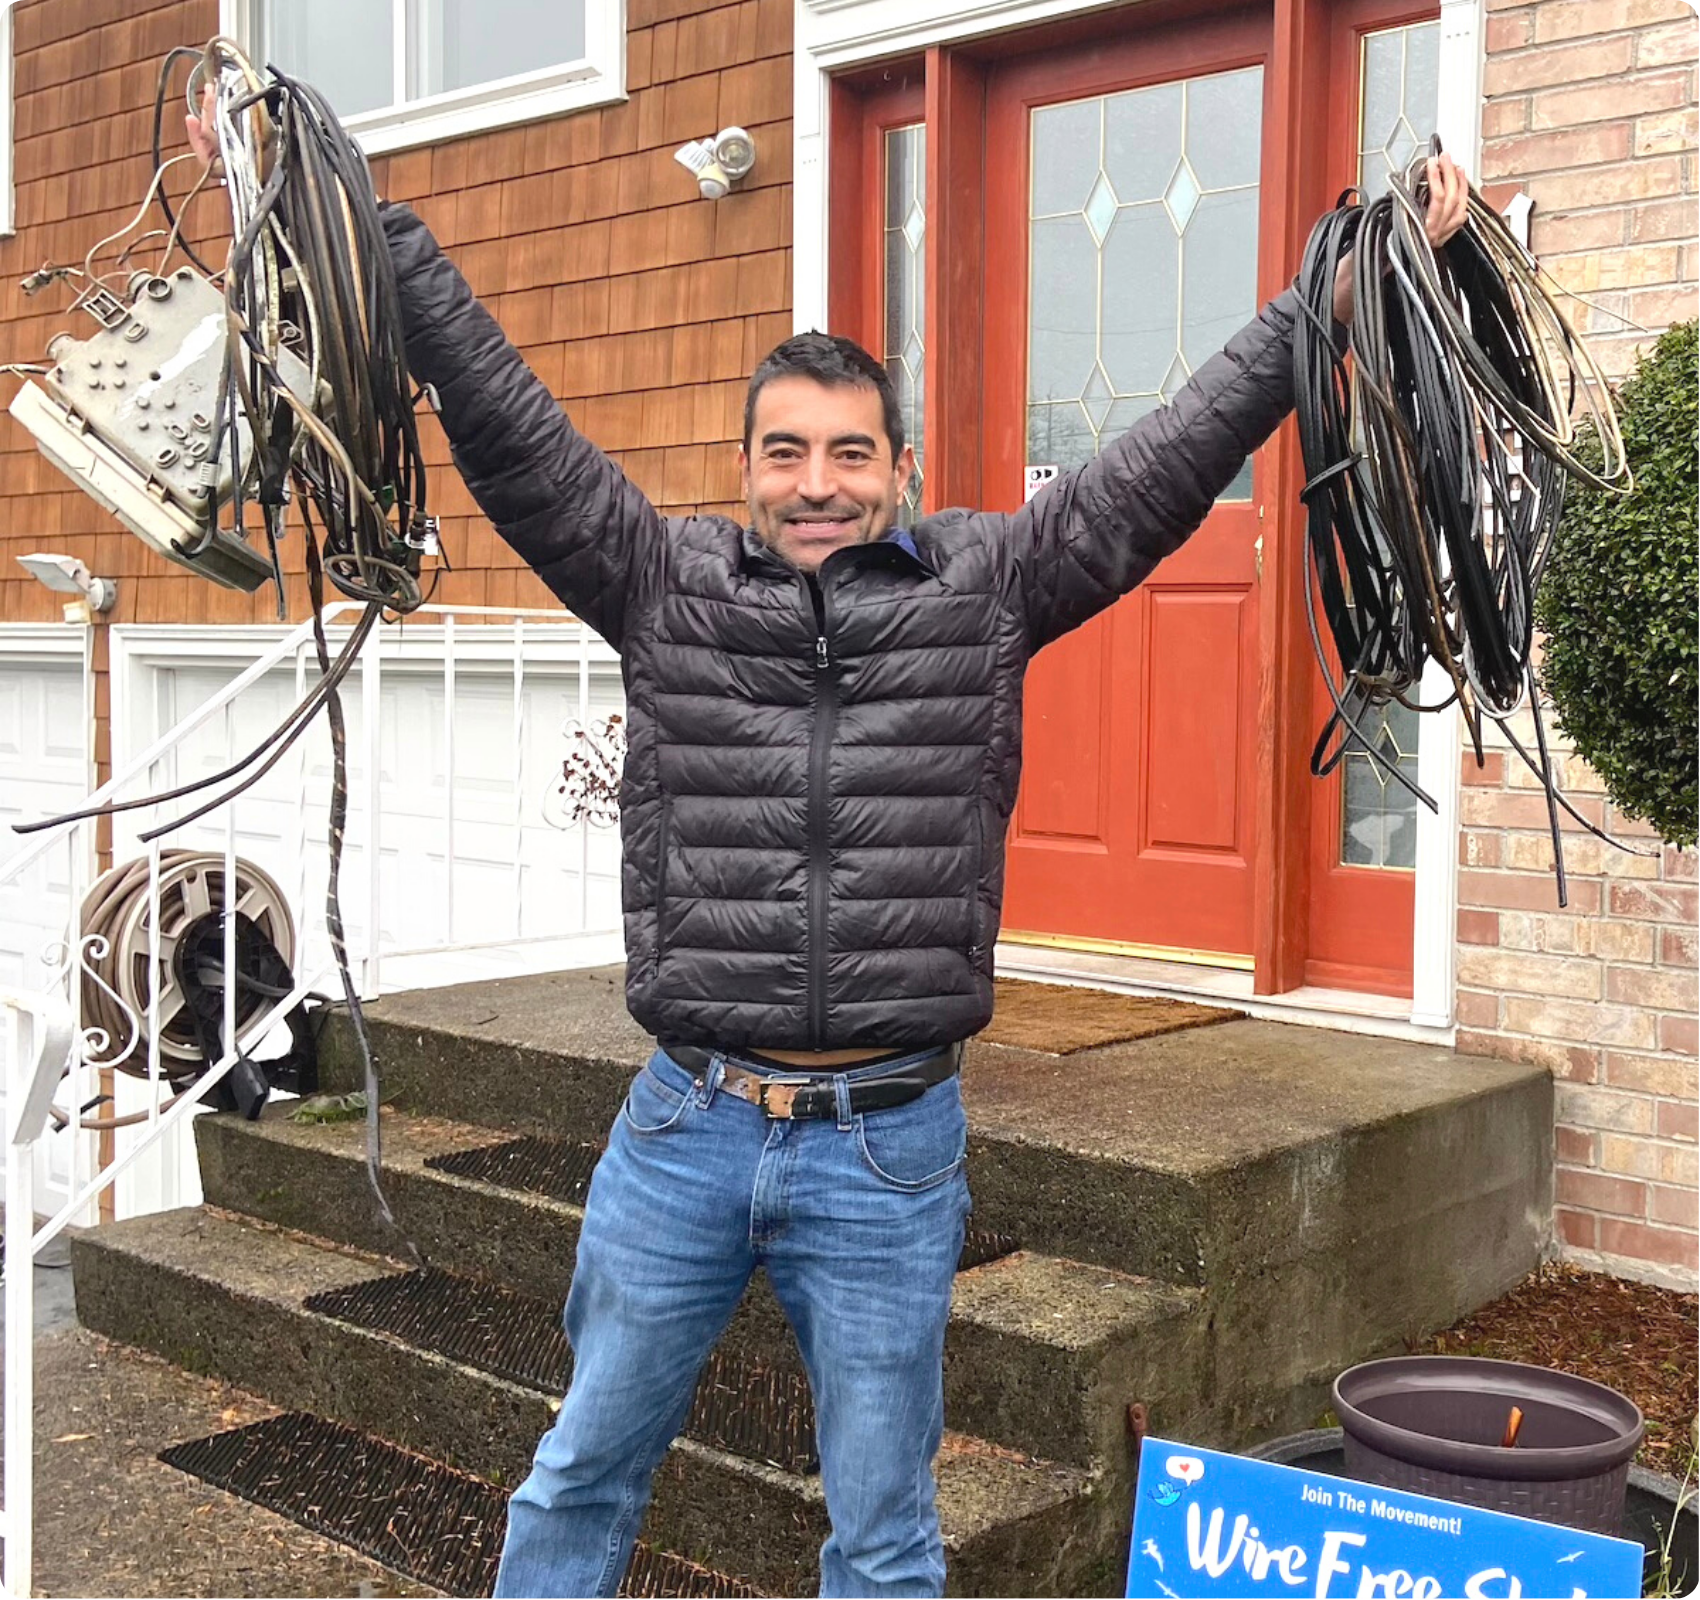 photo of man with raised arms and holding coils of wire and service box removed from his home